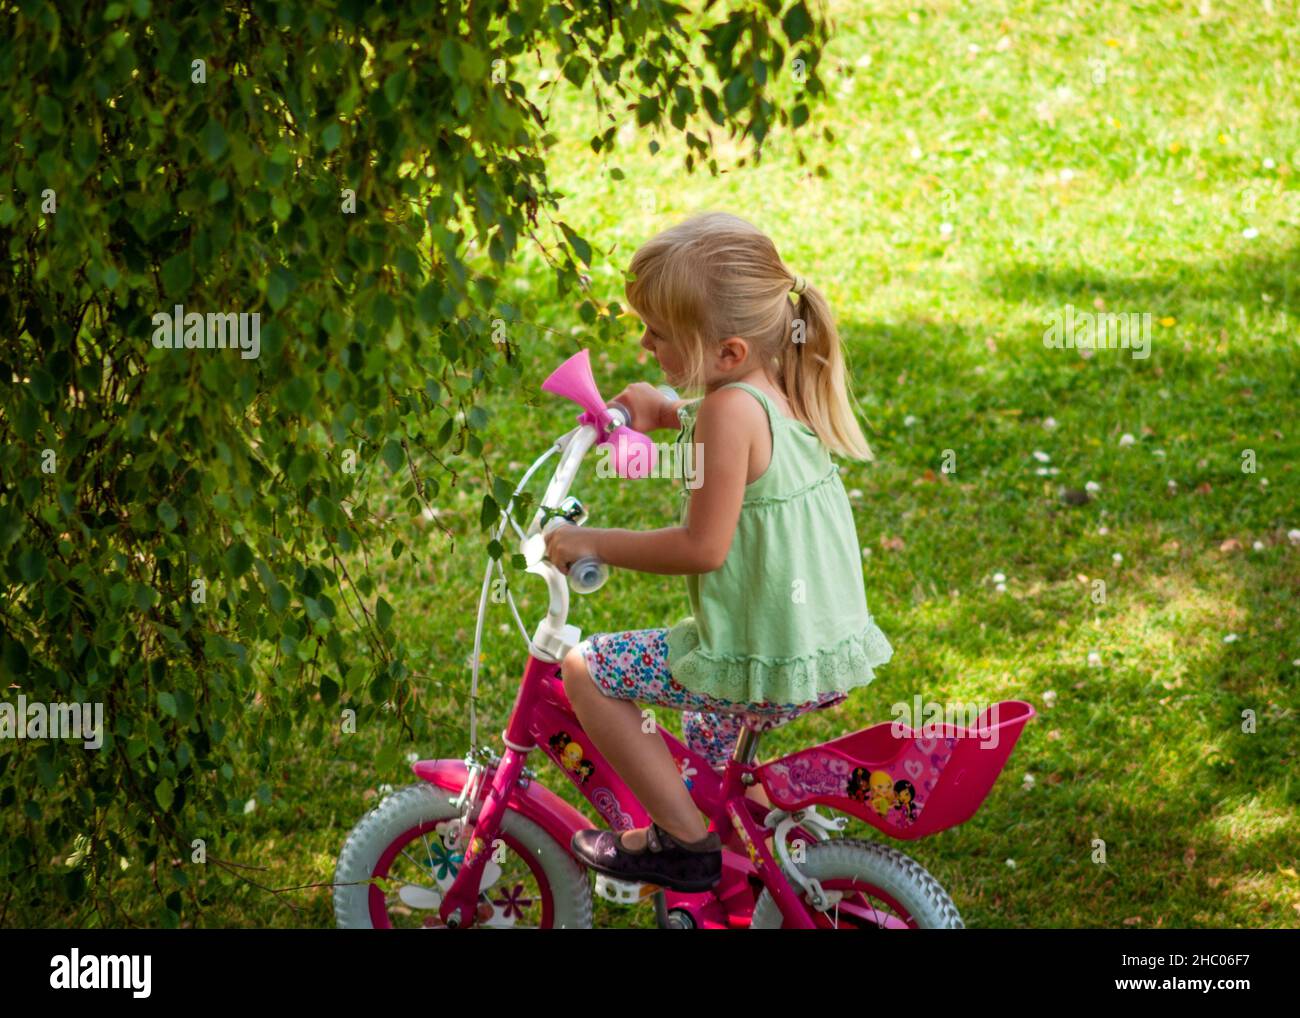 Little girl riding 12 inches pink girl's pedal bike with training wheels in open shade on green meadow backyard Stock Photo